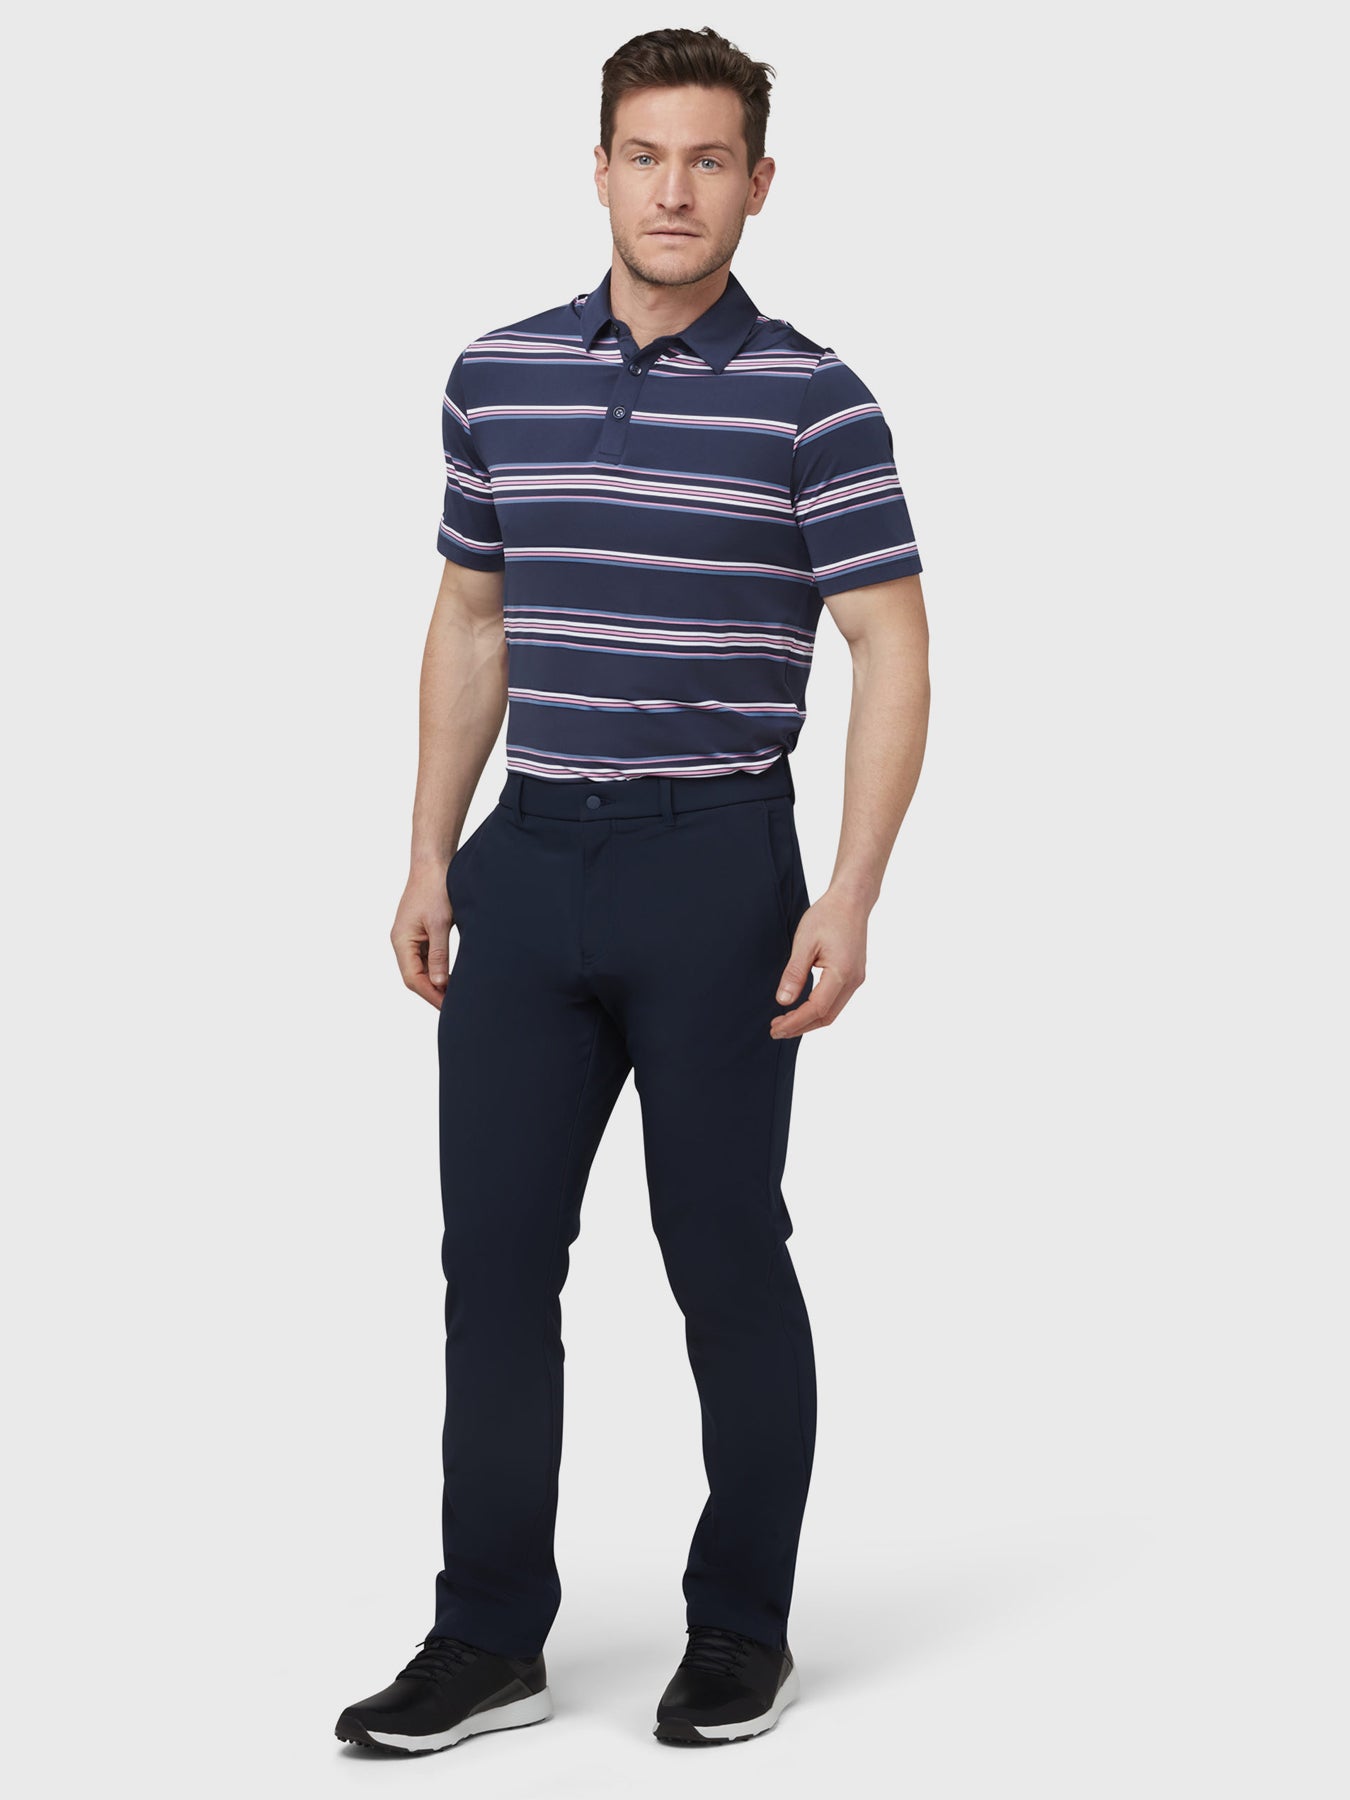 View Resort Ventilated Stripe Golf Polo In Peacoat Peacoat XXXL information